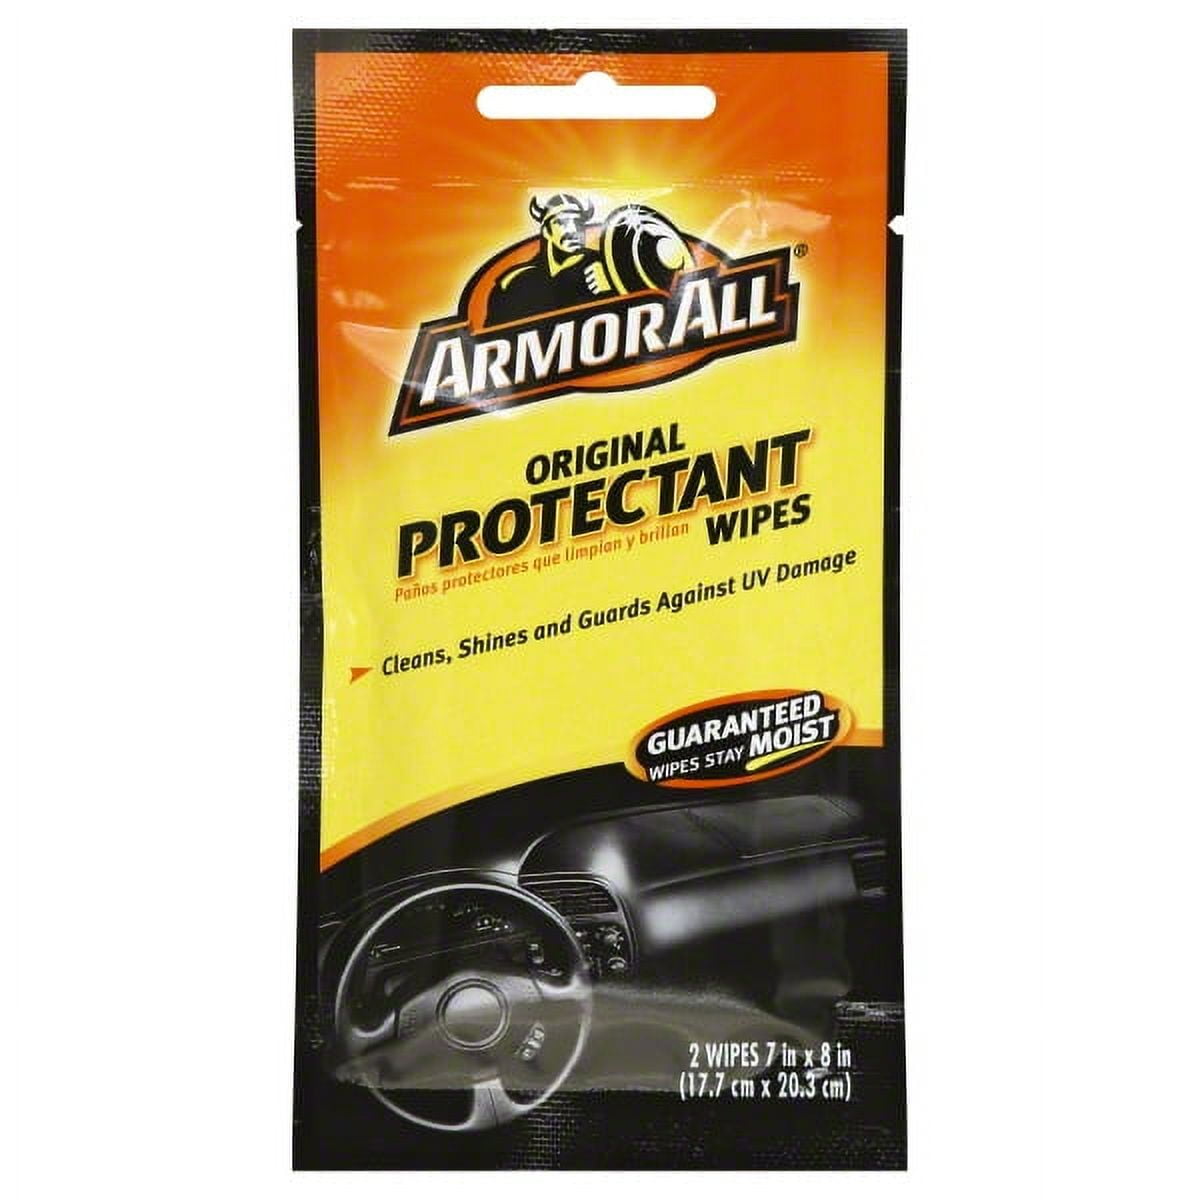 Armor All Original Protectant Wipes Cleans, Shines & Guards Car Interior  6-Packs